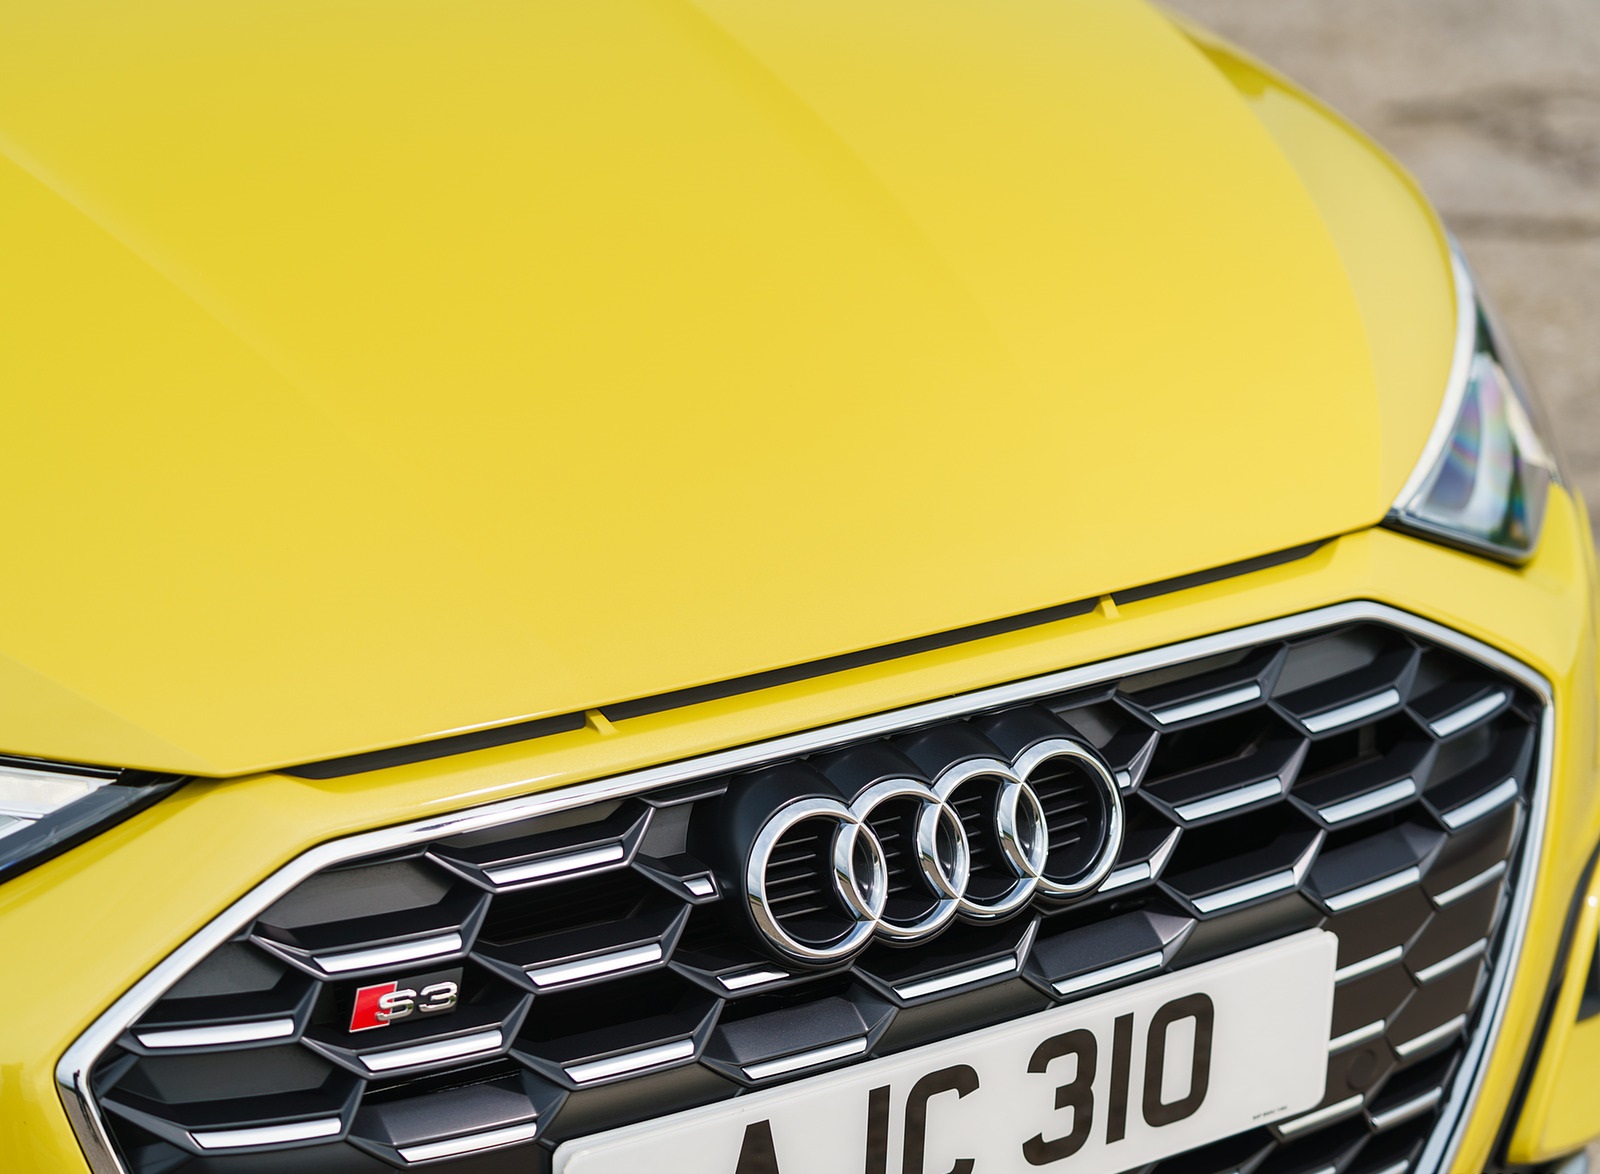 2021 Audi S3 Sportback (UK-Spec) Grill Wallpapers  #66 of 95